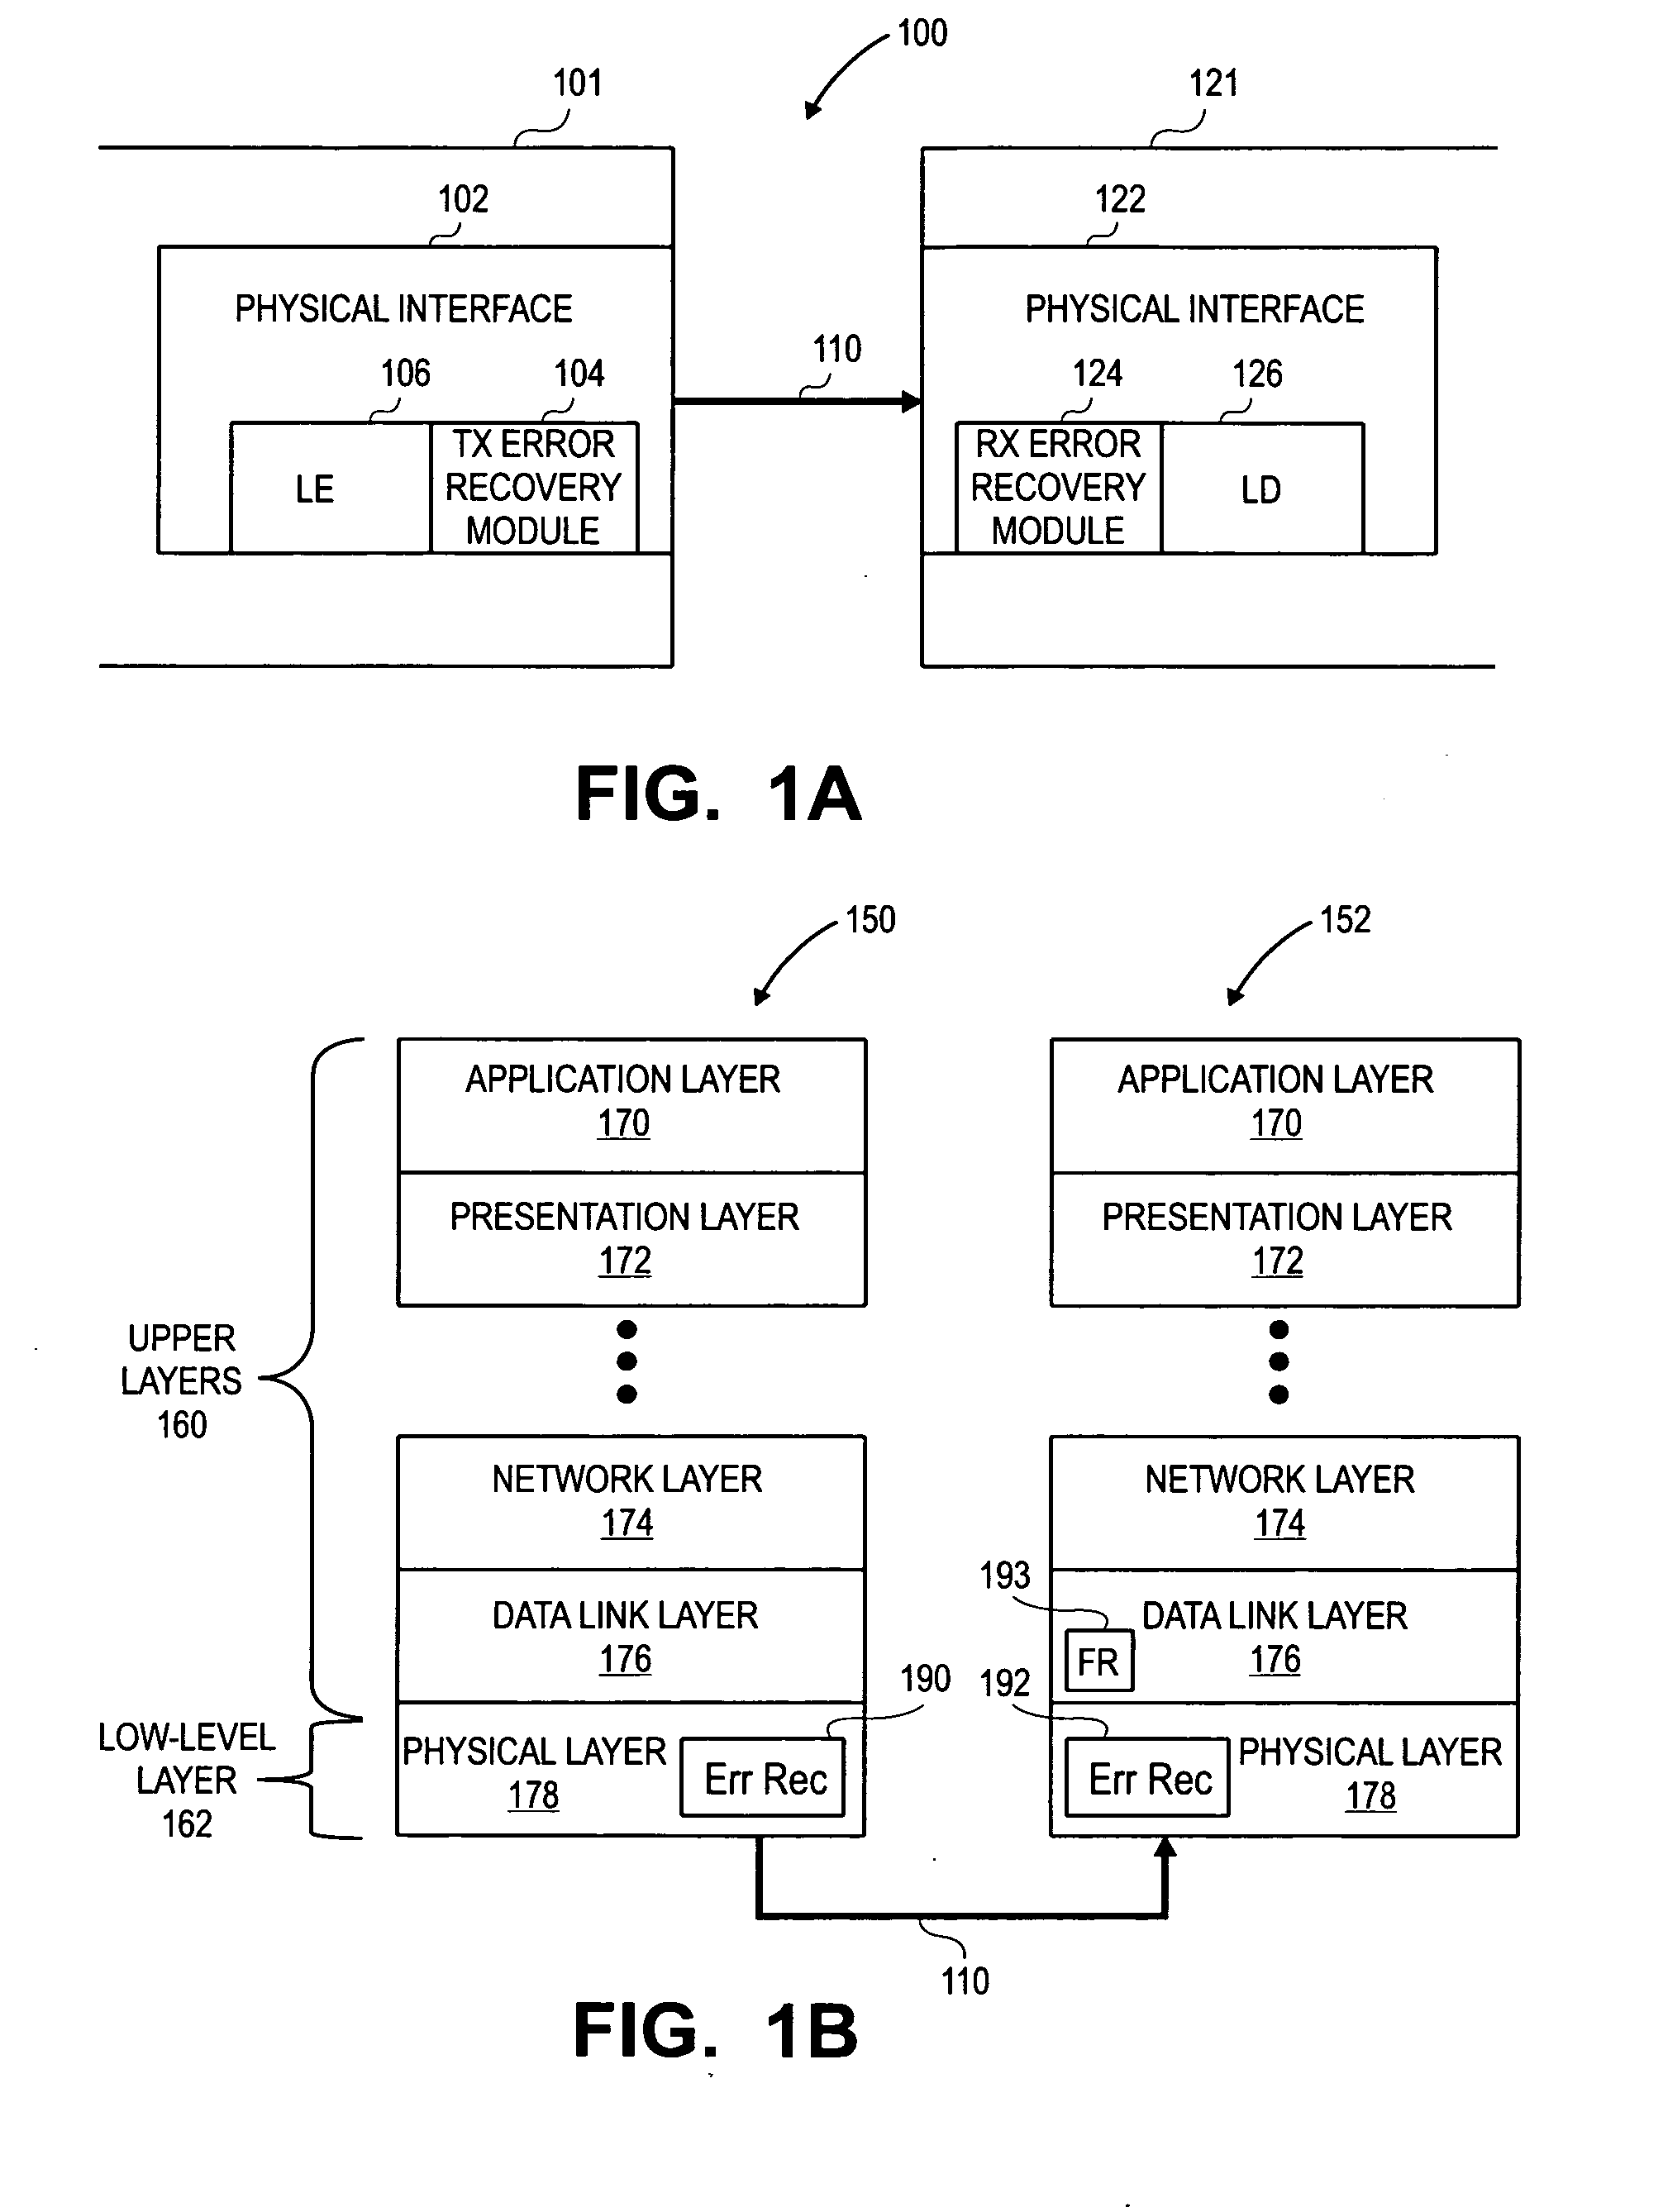 Error detection in physical interfaces for point-to-point communications between integrated circuits